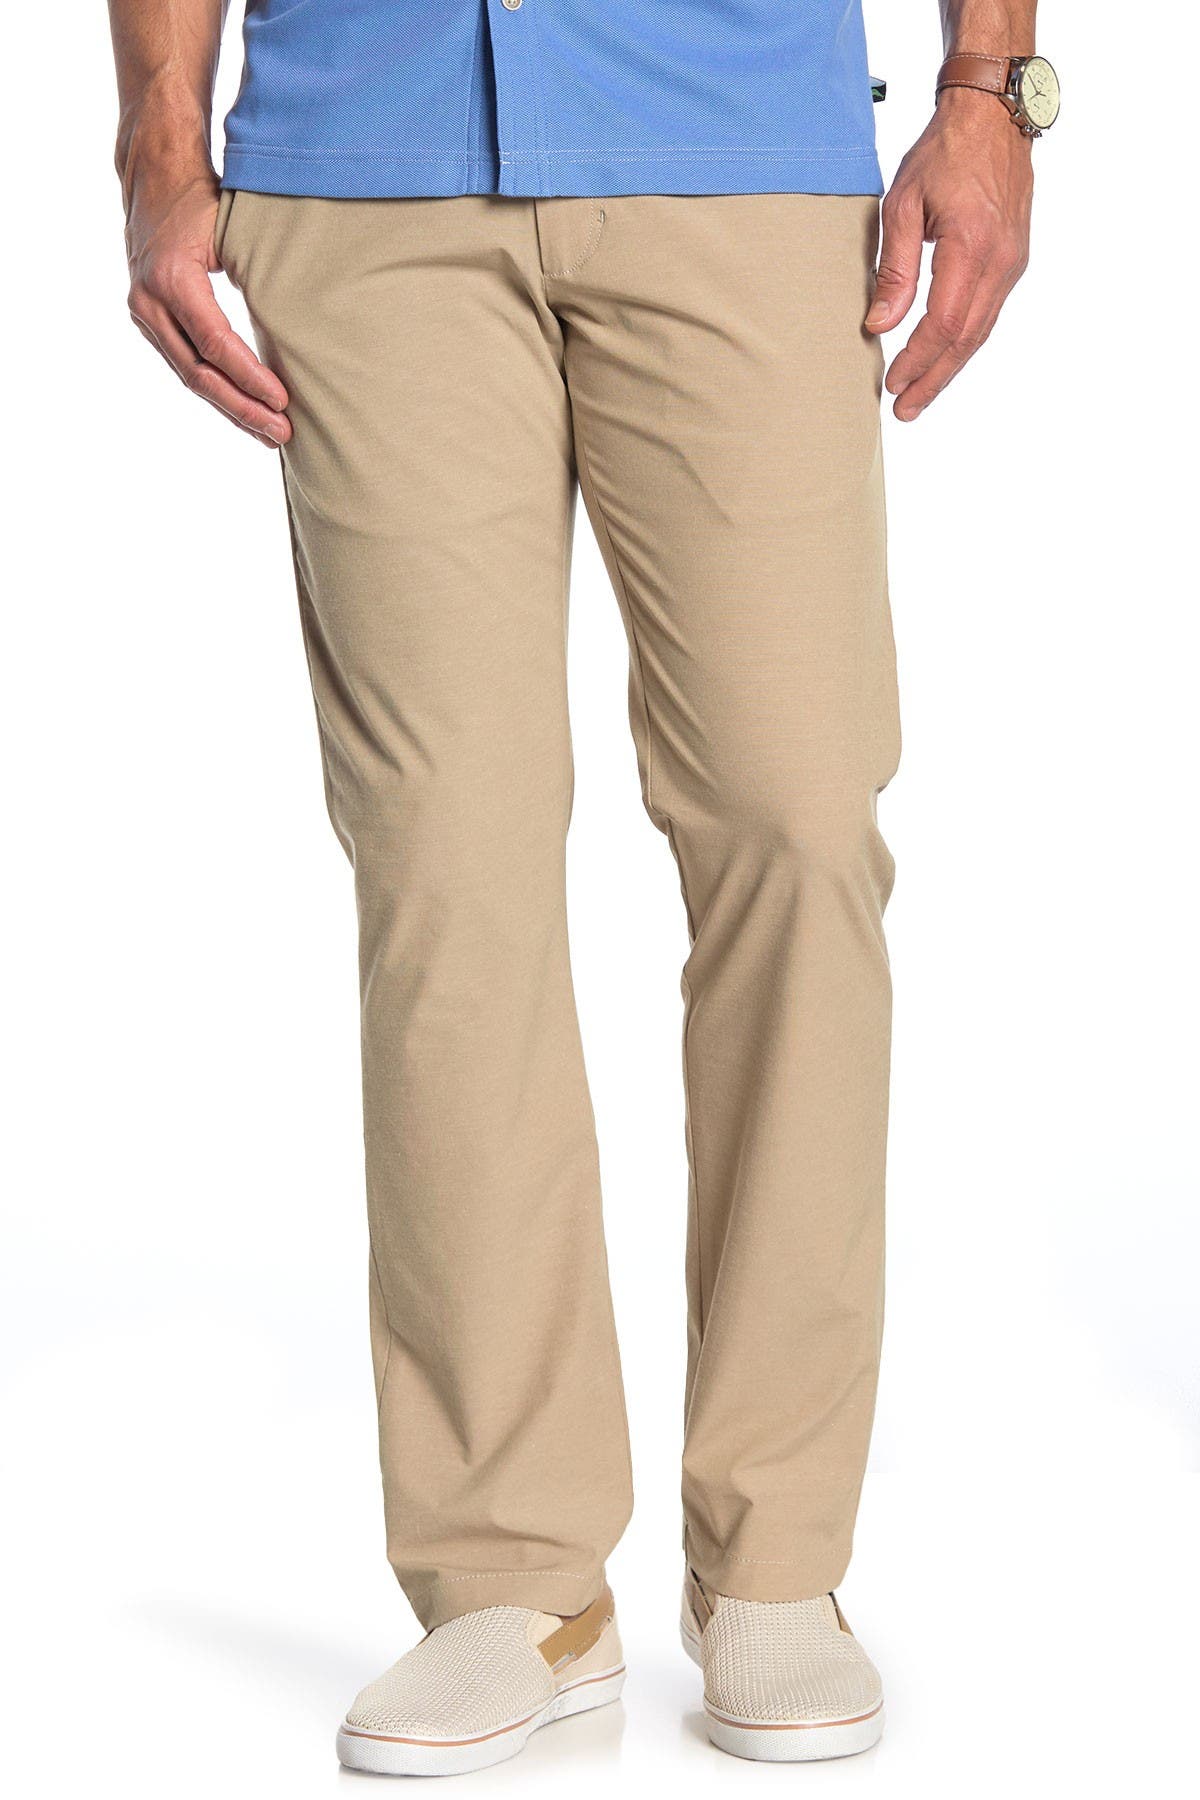 tommy bahama snow pants online -